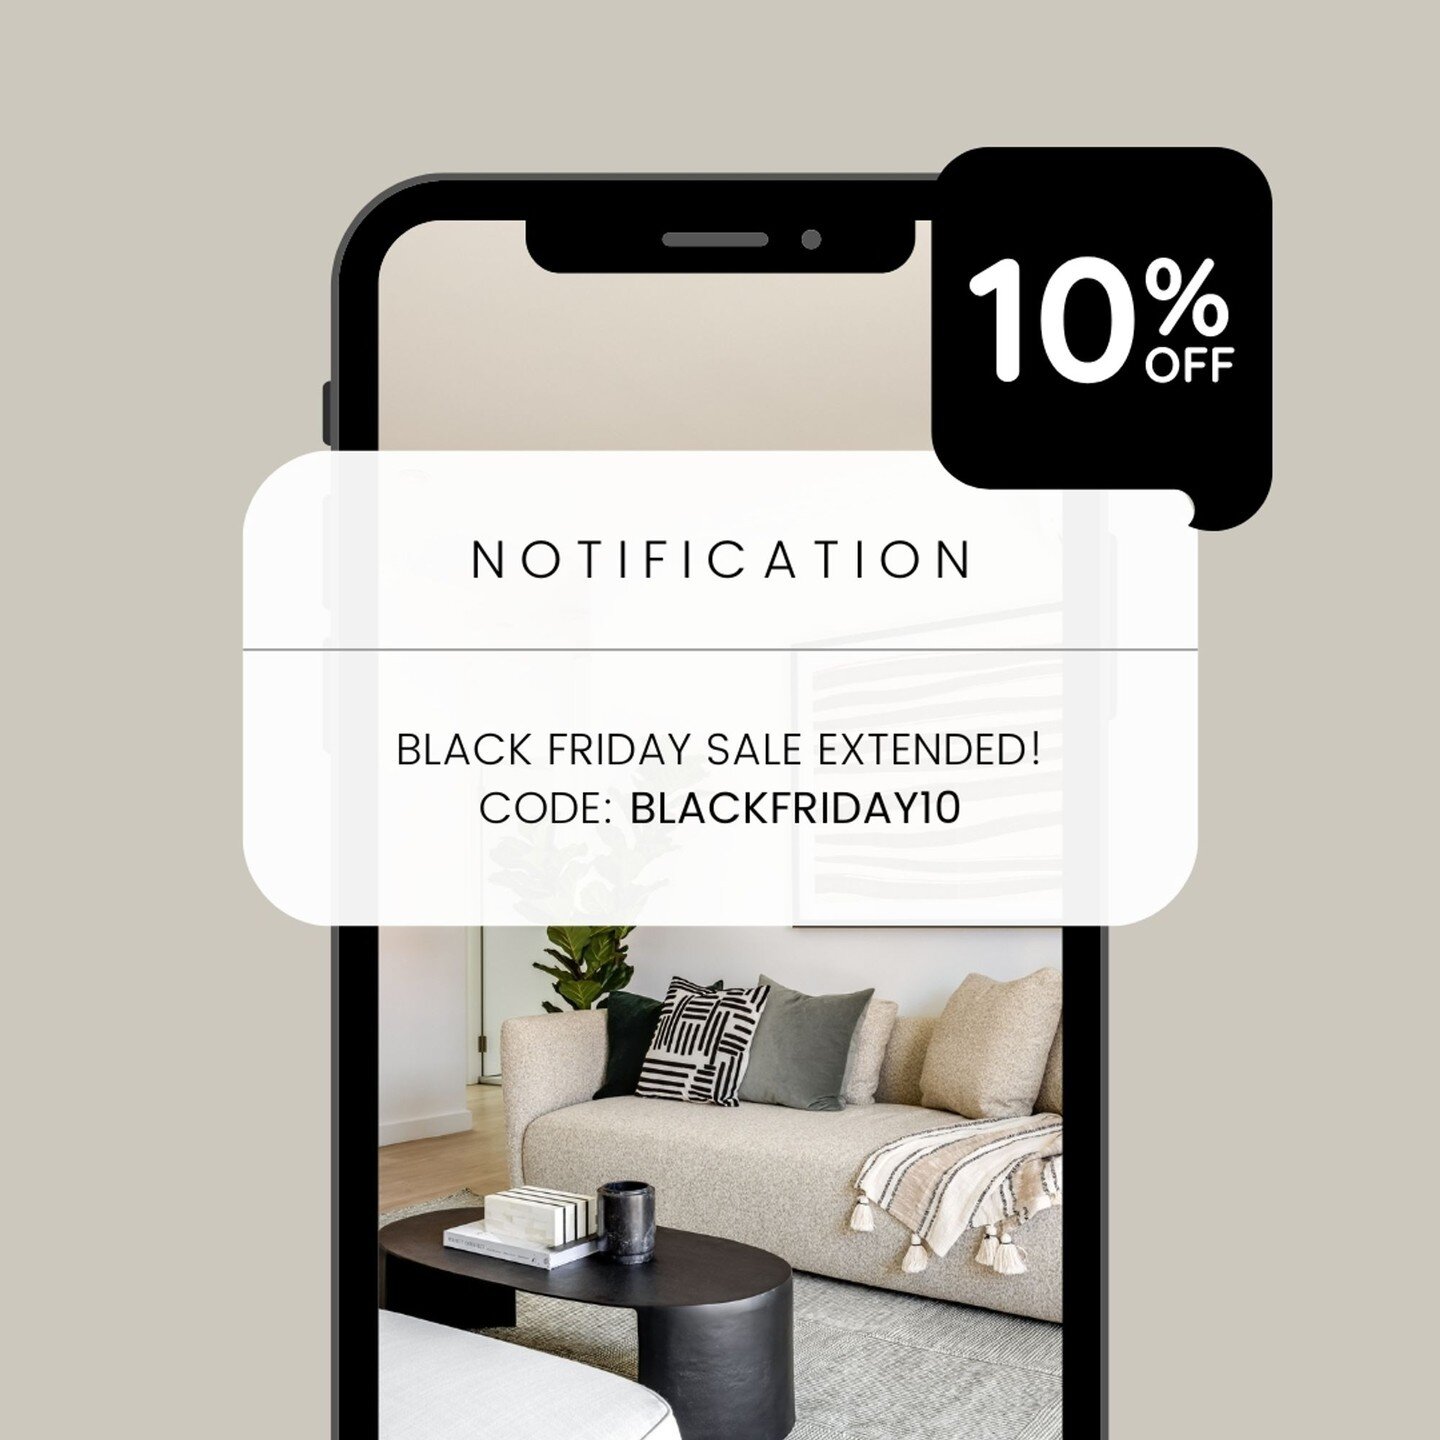 ~ Black Friday Sale! ~⁠
⁠
Enjoy 10% off your next stay when booking via our website [www.furnishedproperties.com.au](http://www.furnishedproperties.com.au/)⁠
⁠
With homes across Sydney, our properties range from 1 bedroom to 4 bedroom and are fully e